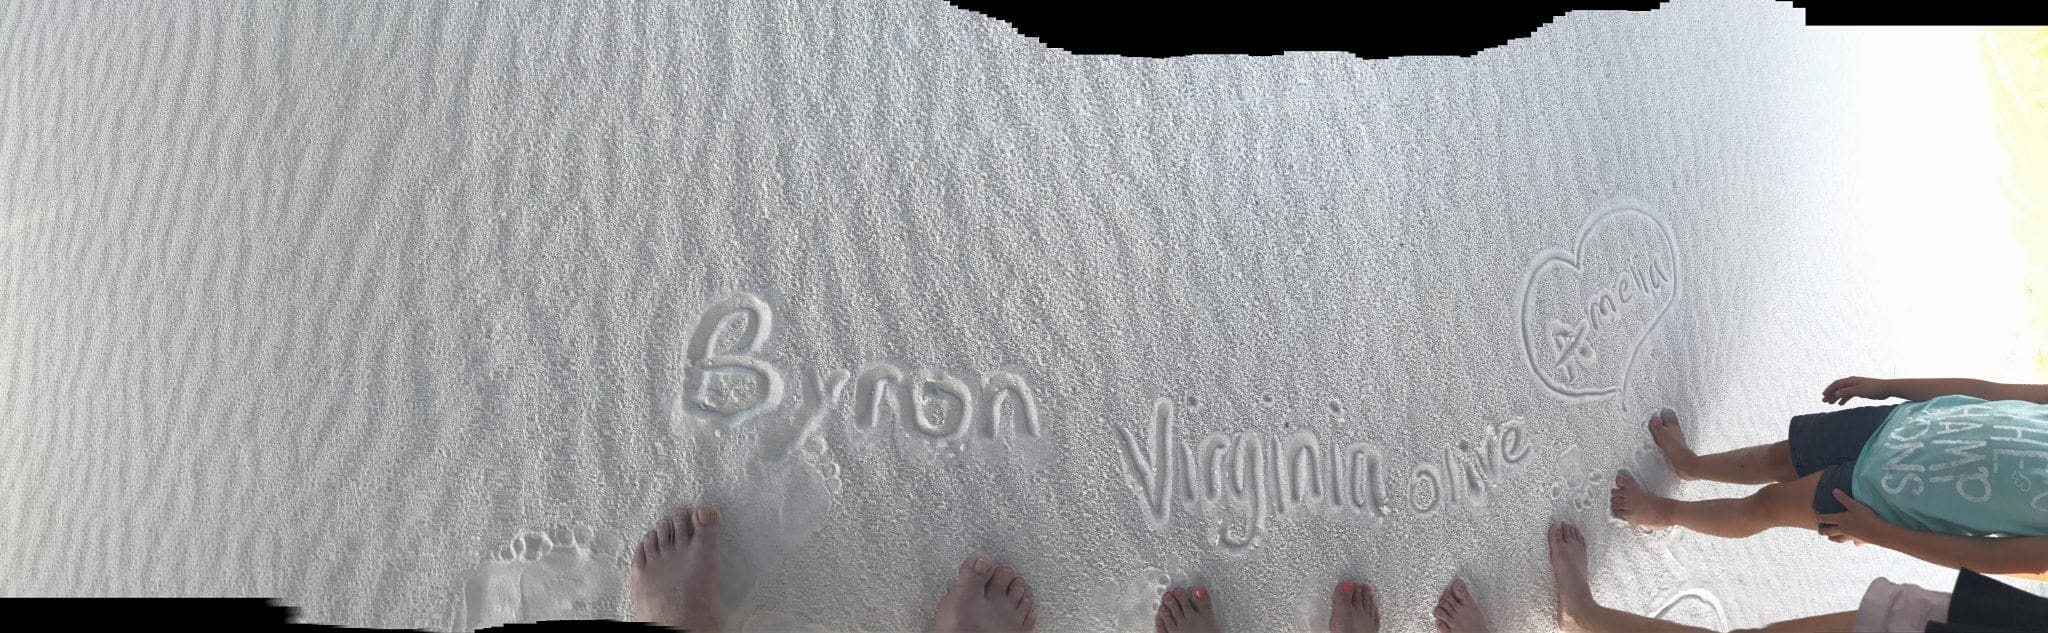 Writing our names in the White Sands